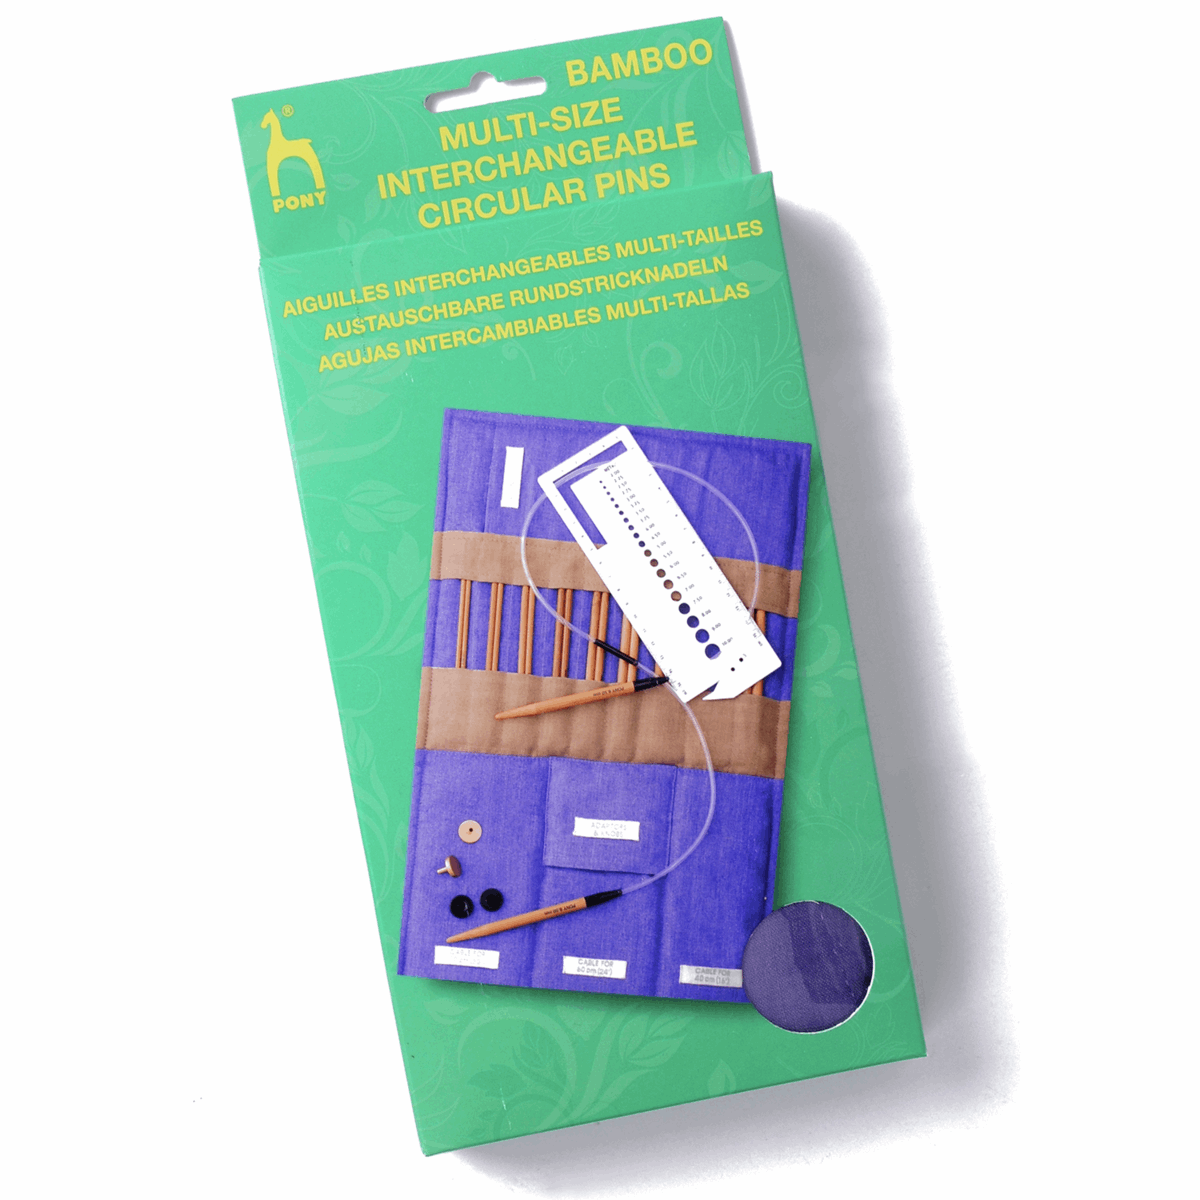 Pony Interchangeable Multi-size Circular Bamboo Knitting Pins with Fabric Case